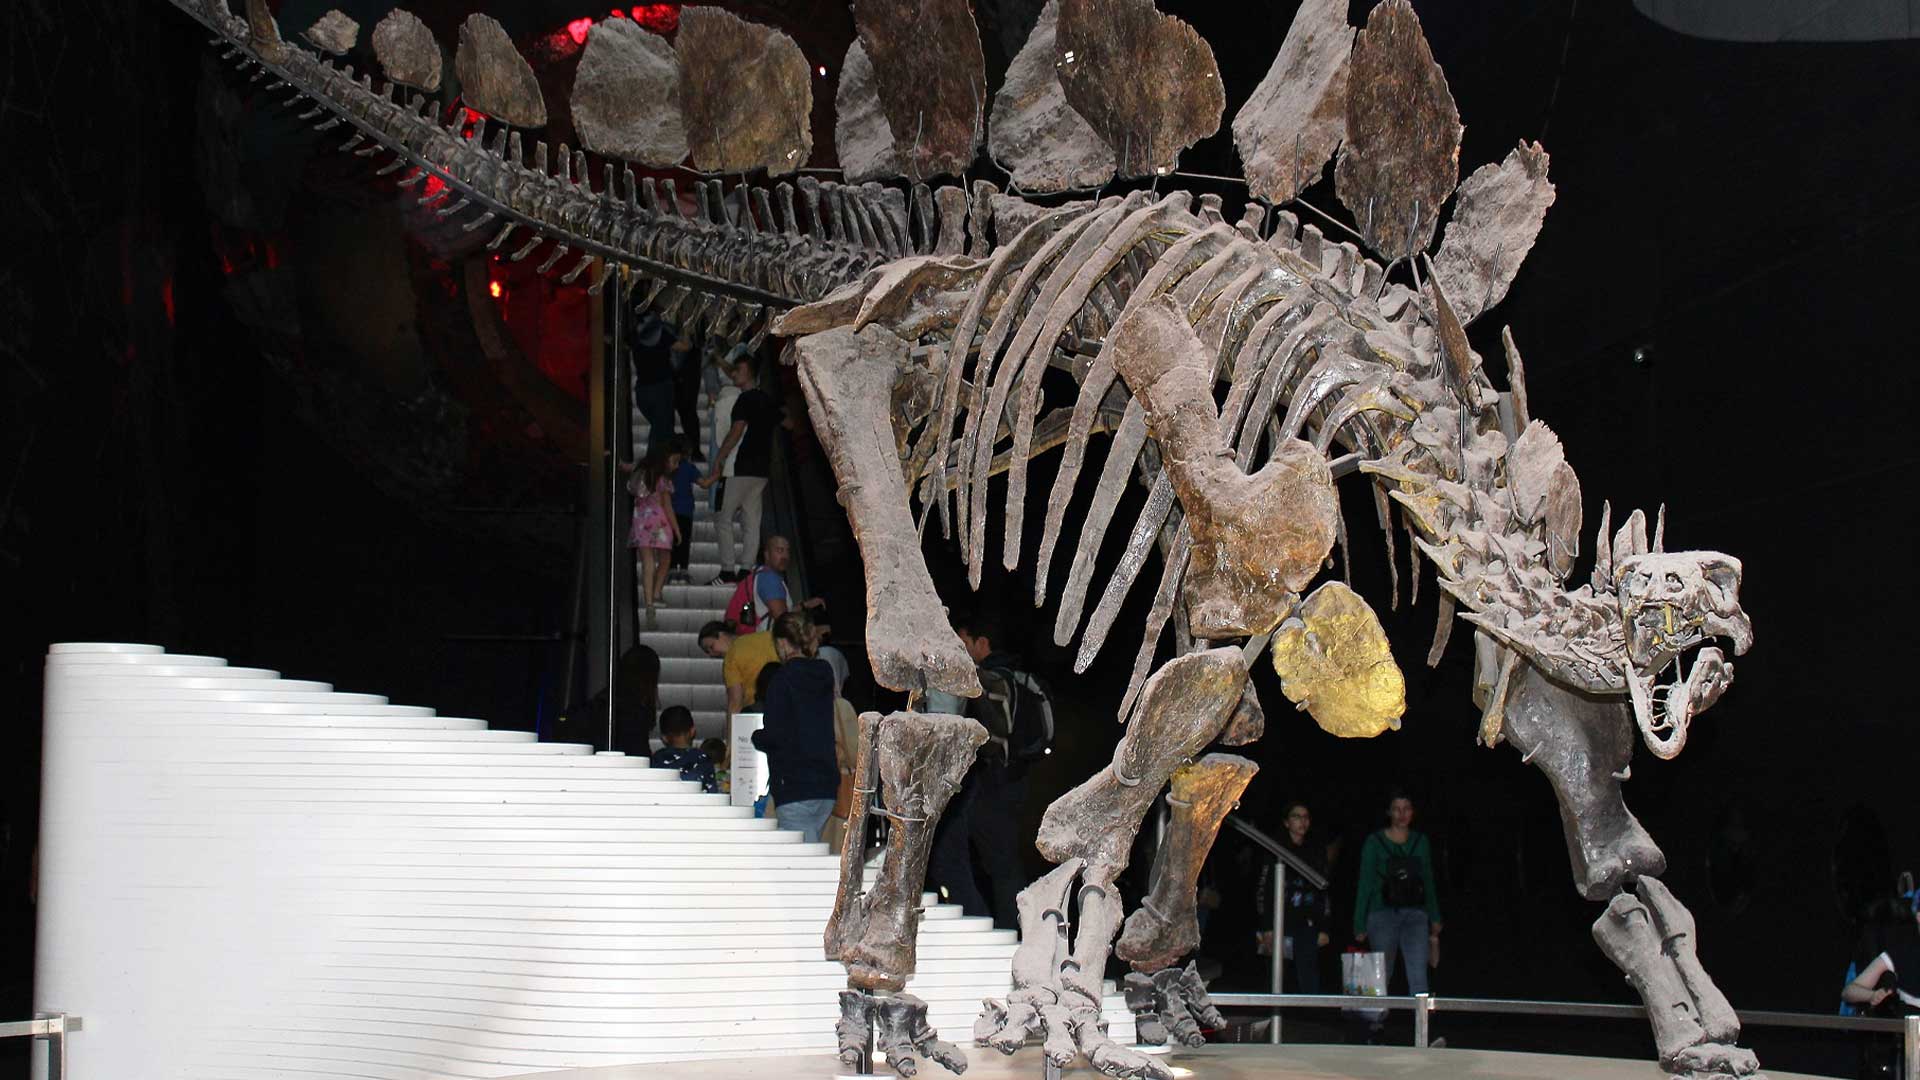 A stegosaurus fossil fetched a record $44.6M at Sotheby's. Should they be auctioned?